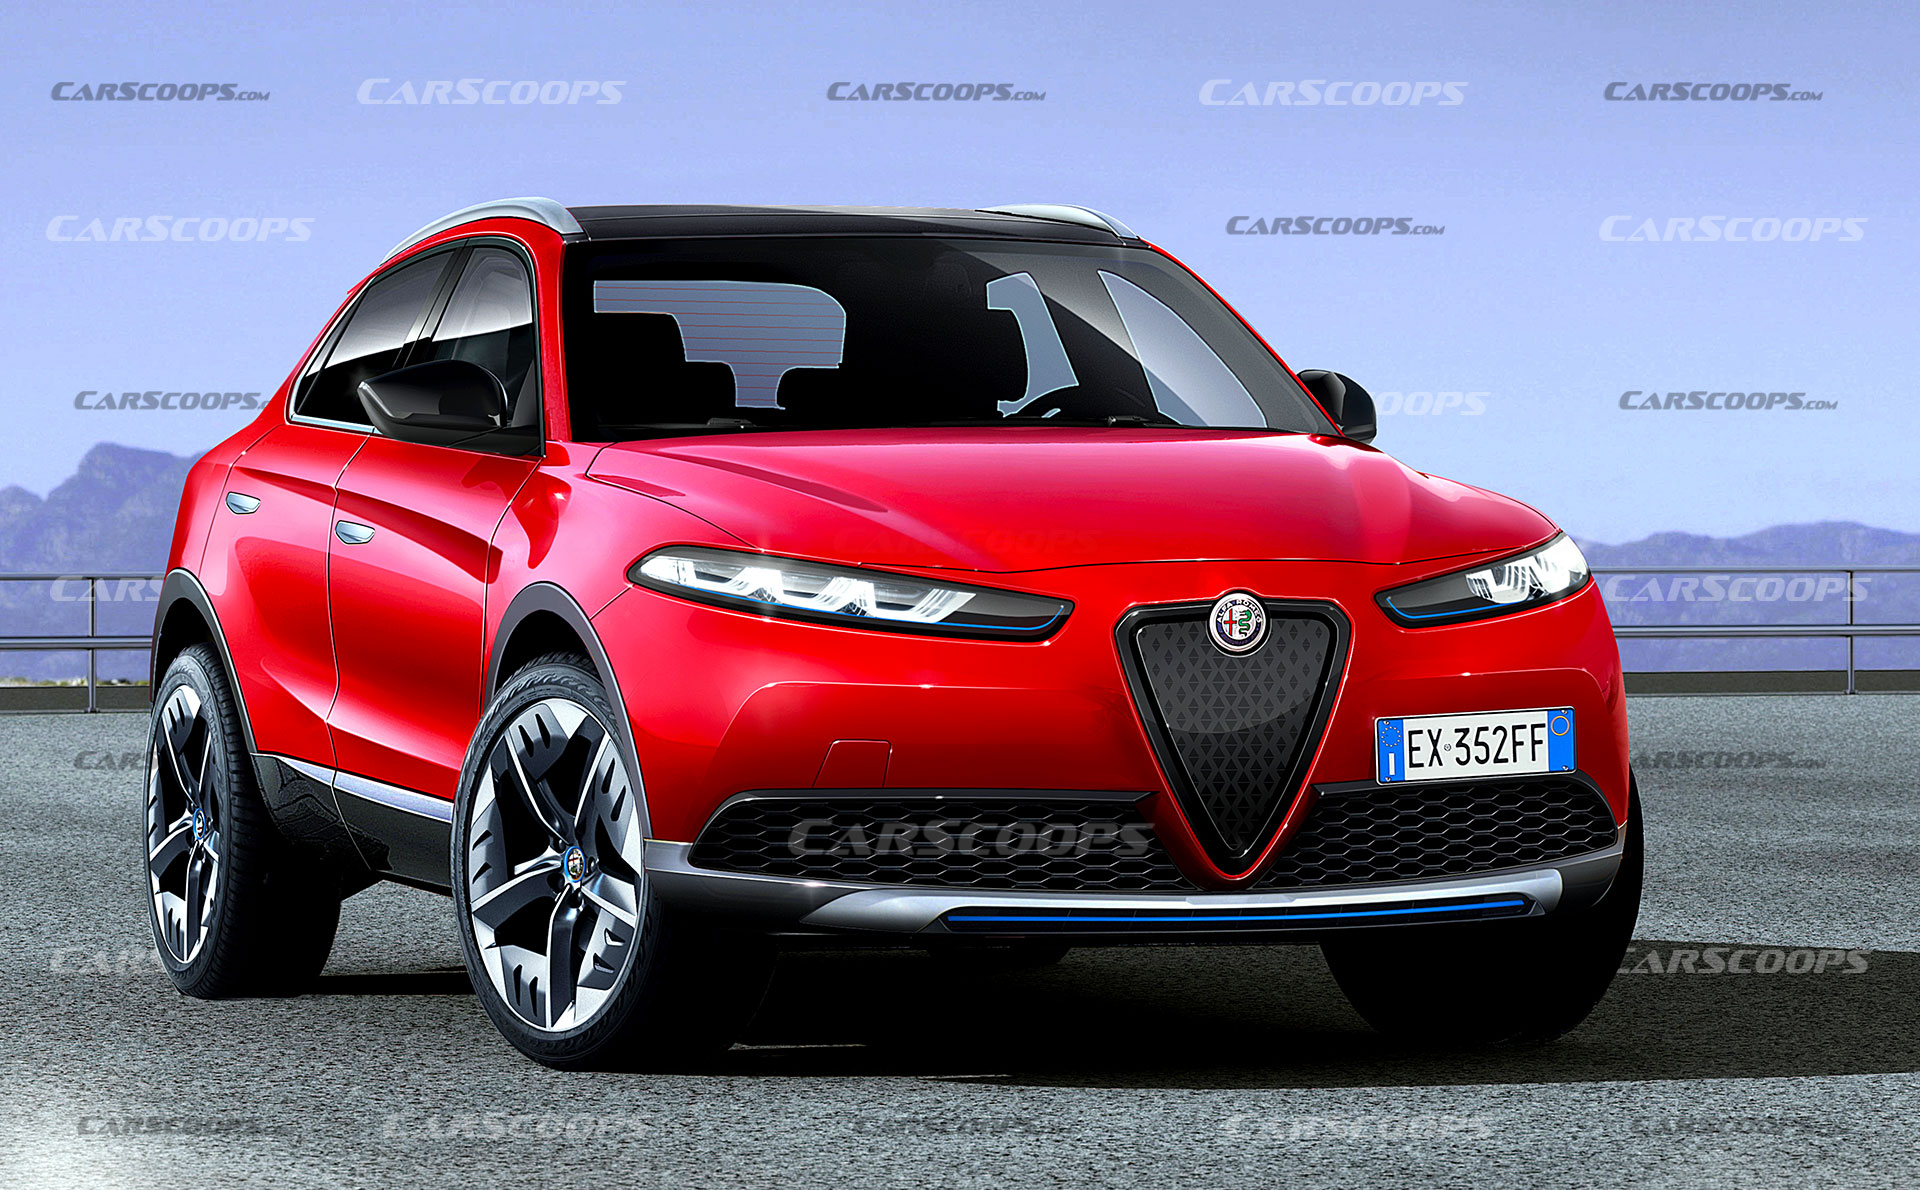 Alfa Romeo Cars and SUVs: Latest Prices, Reviews, Specs and Photos